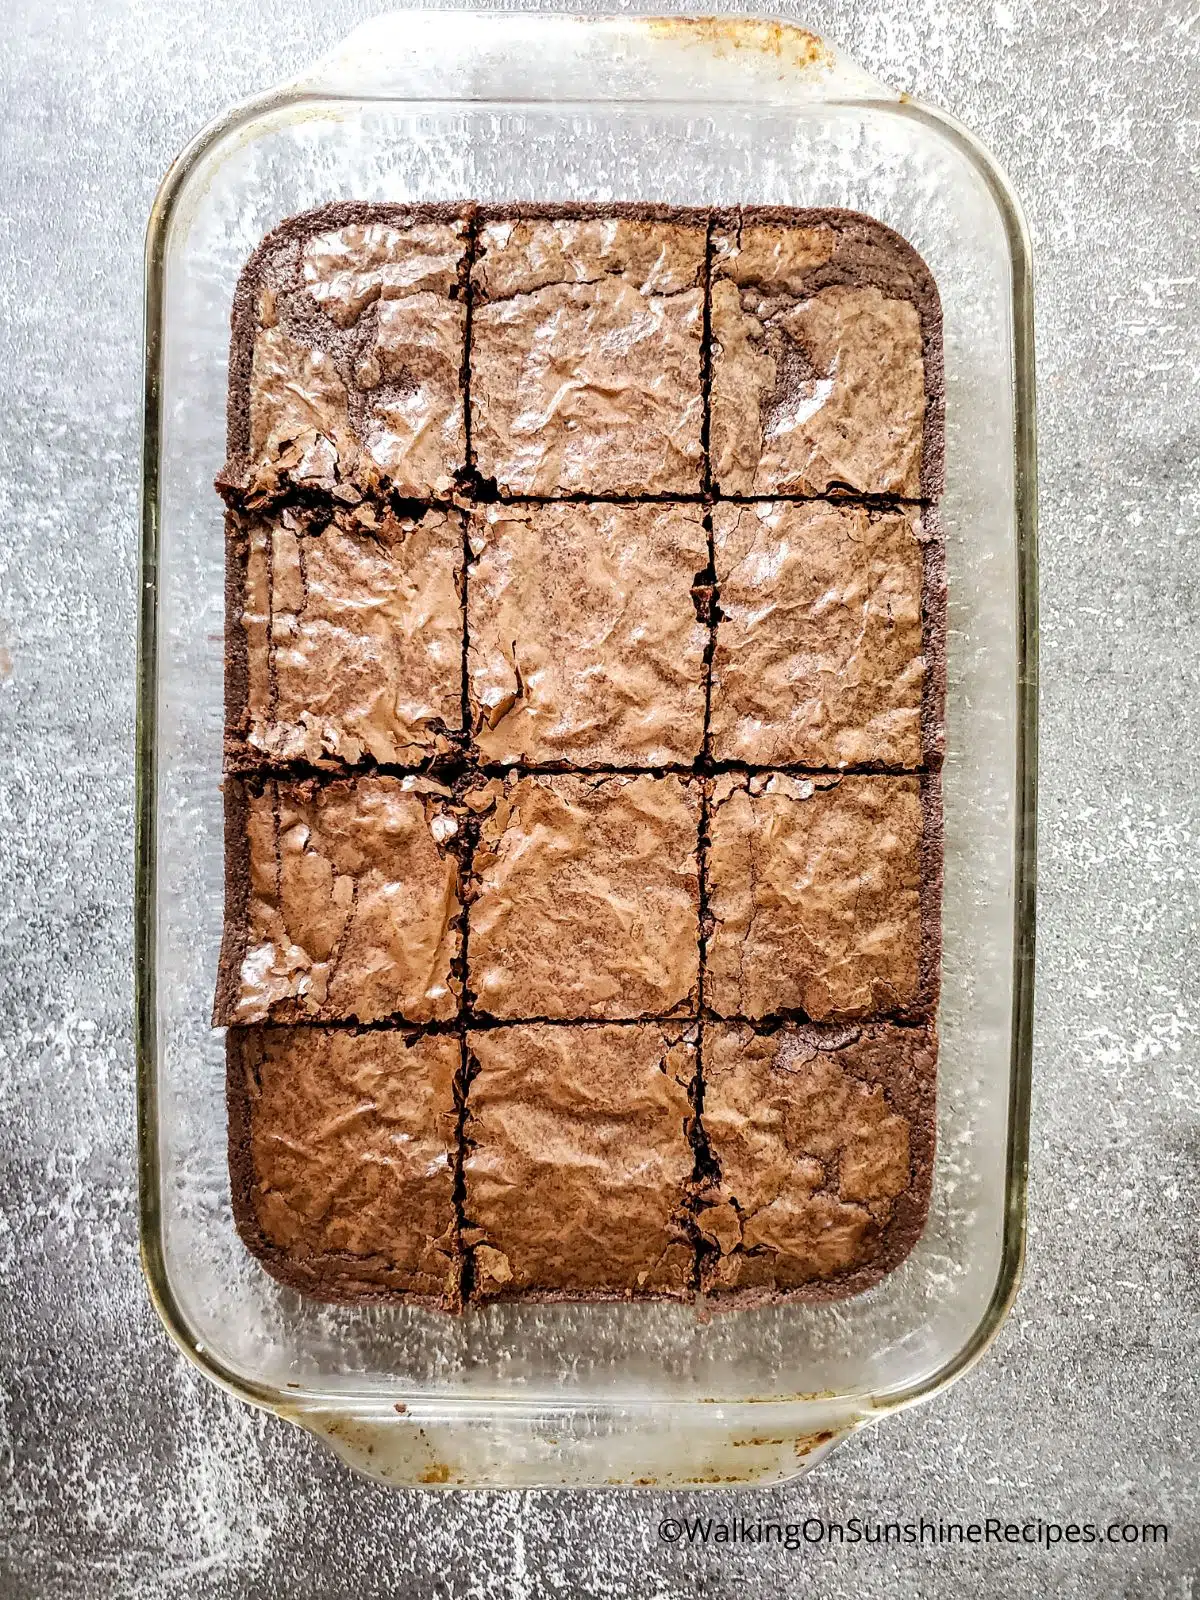 baked brownies in baking dish cut.